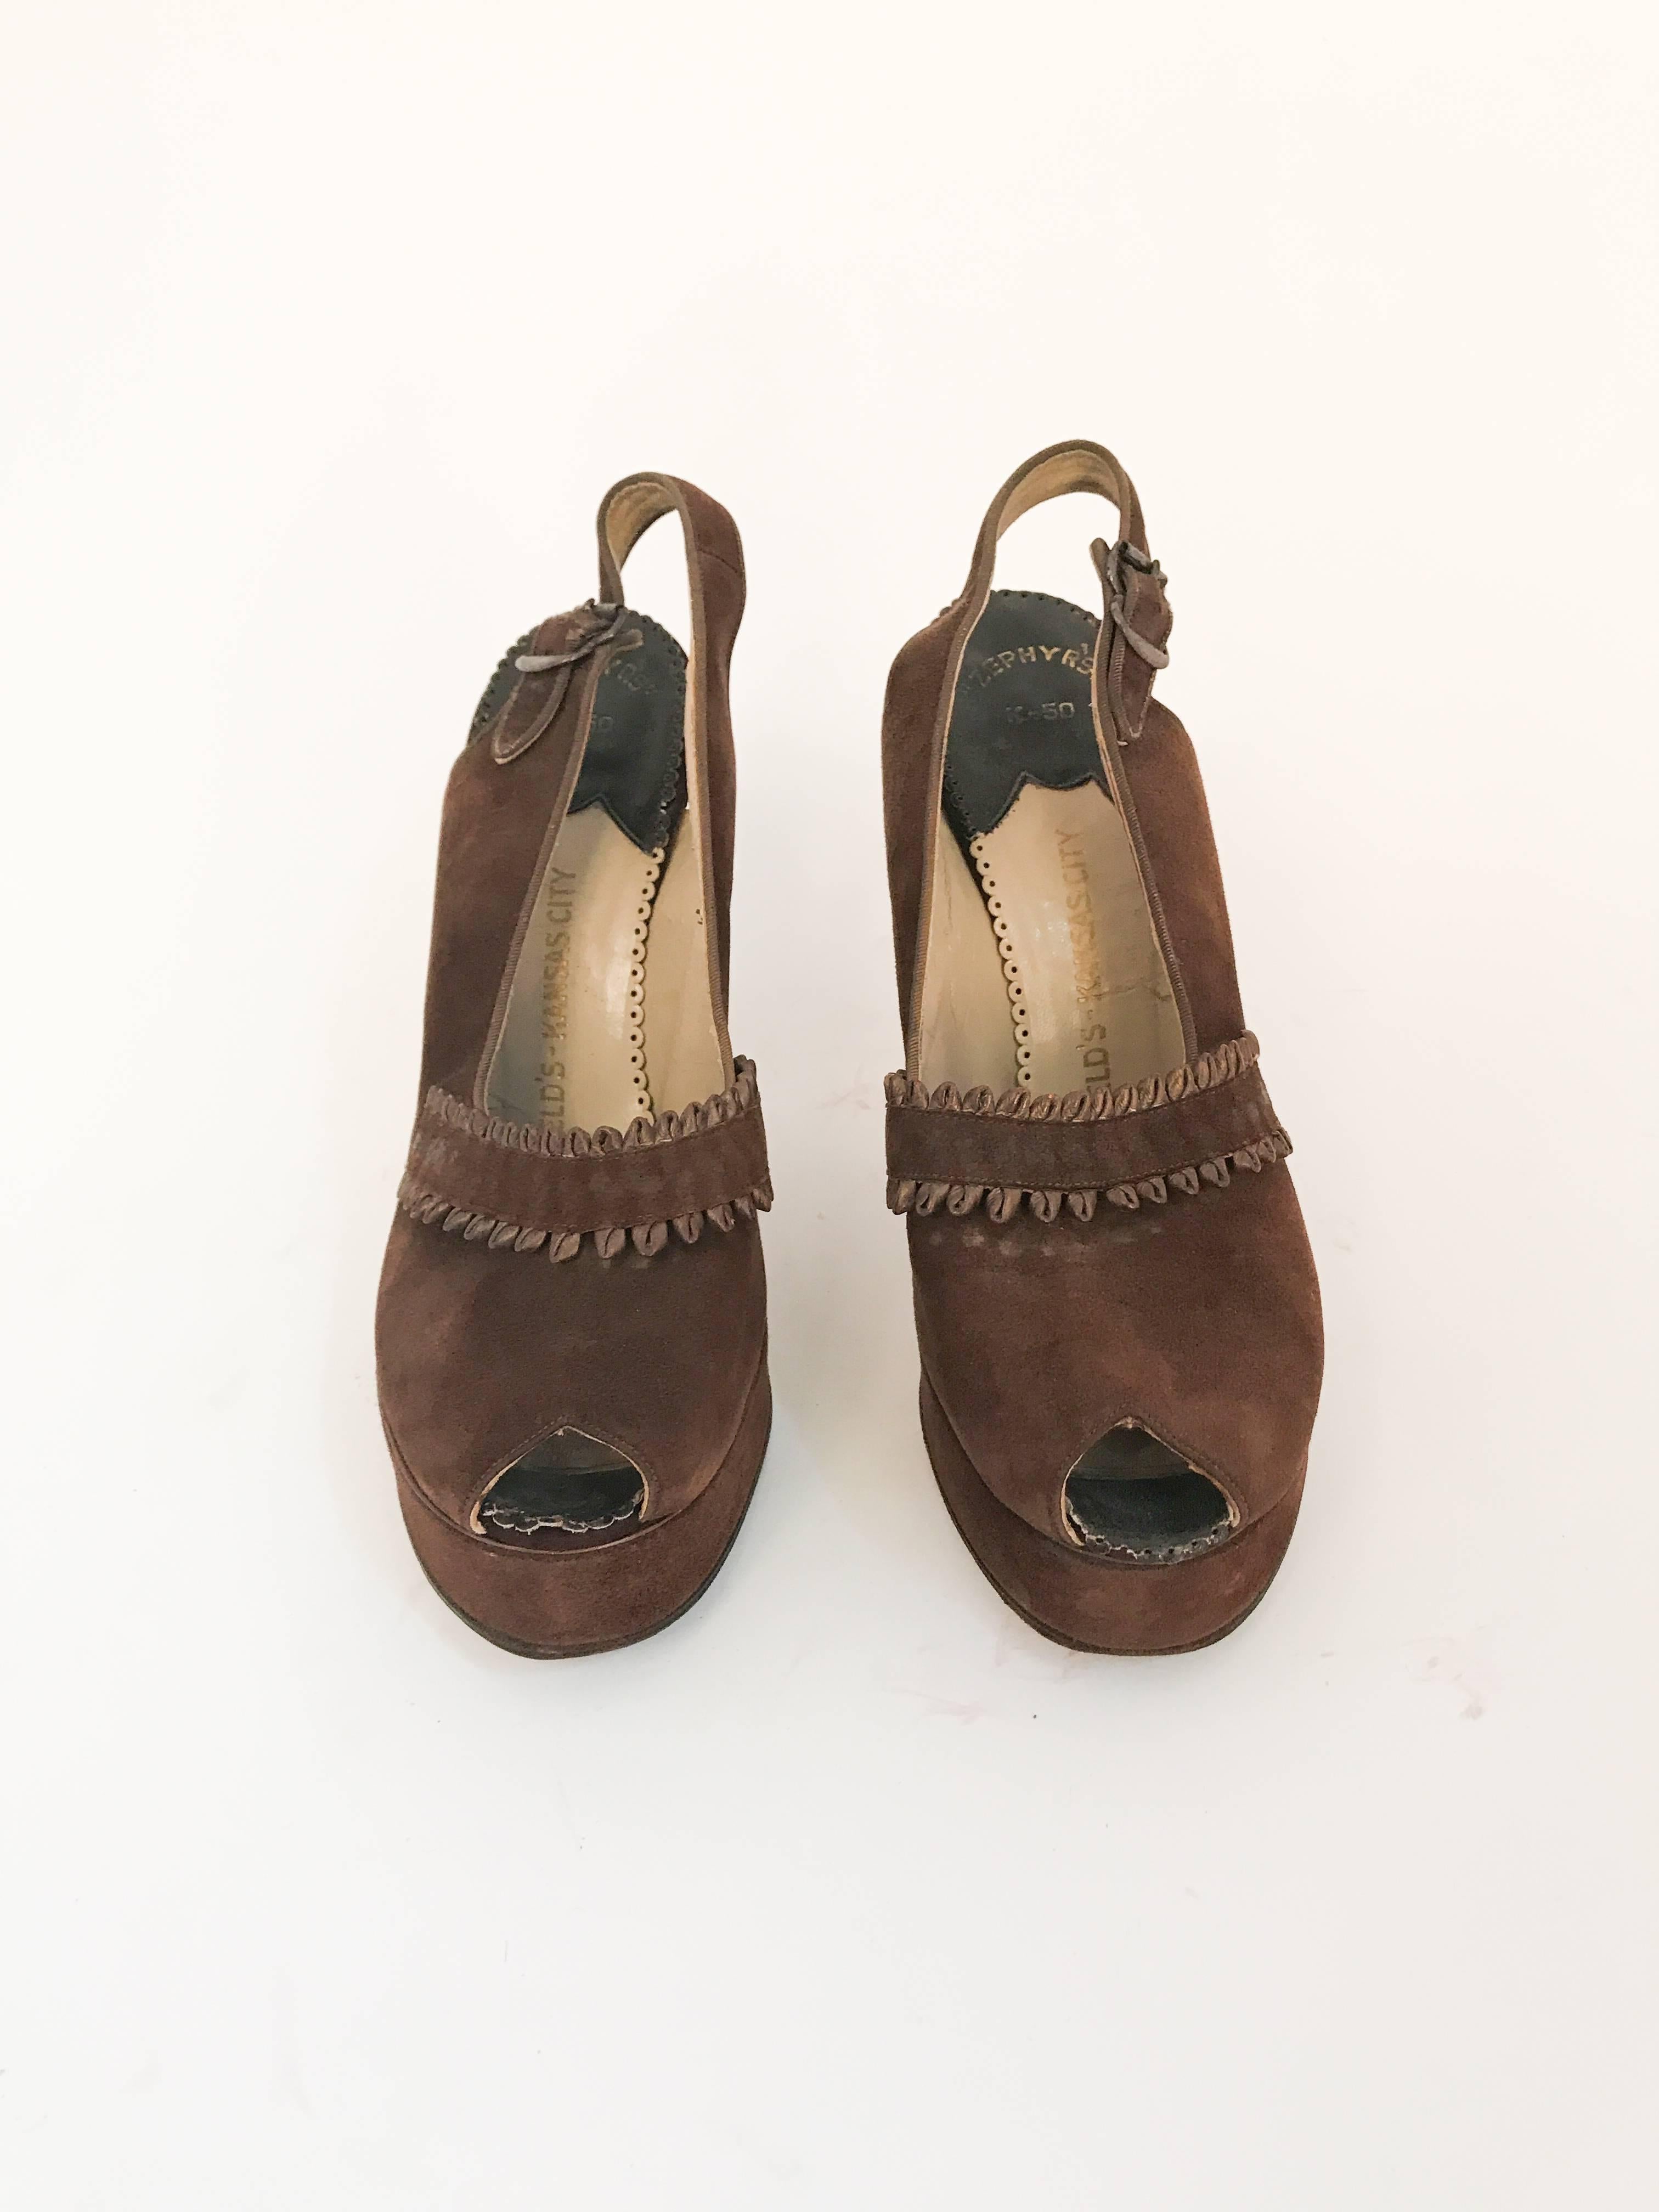 1947 Brown Suede and Leather Sling Back Heels. Brown Leather and suede heels with sling back and buckle closure. Suede and looped leather accent piece. 